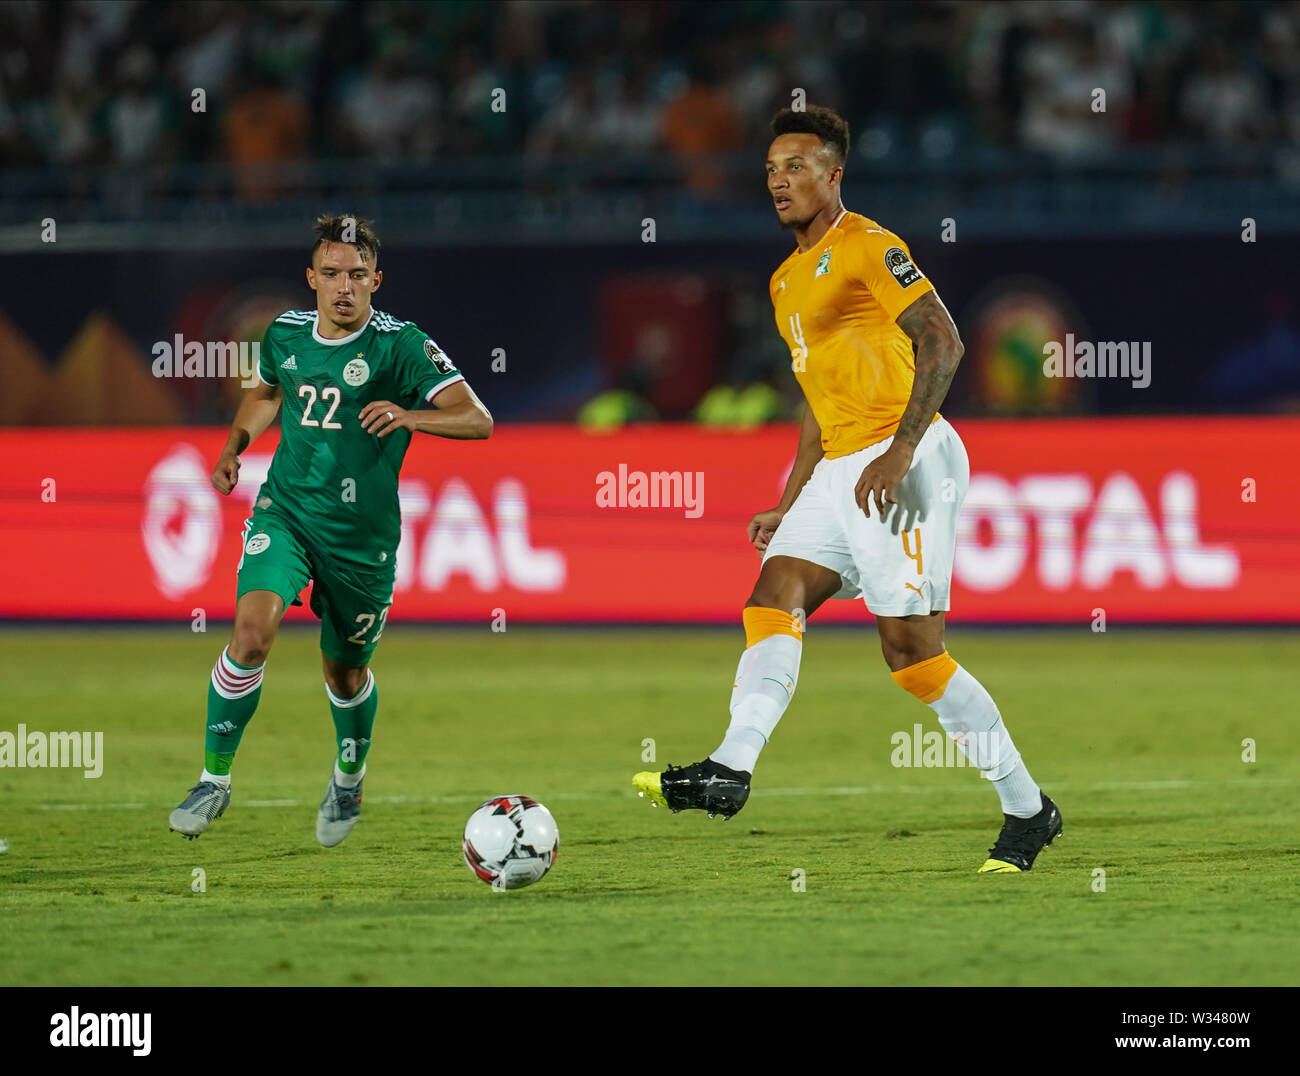 Suez, Egypt. 11th July, 2019. Ivory coast, Egypt - FRANCE OUT July 11, 2019: Jean-Pphilippe Gbamin of Cote D'ivoire during the 2019 African Cup of Nations match between Ivory coast and Algeria at the Suez Stadium in Suez, Egypt. Ulrik Pedersen/CSM/Alamy Live News Stock Photo